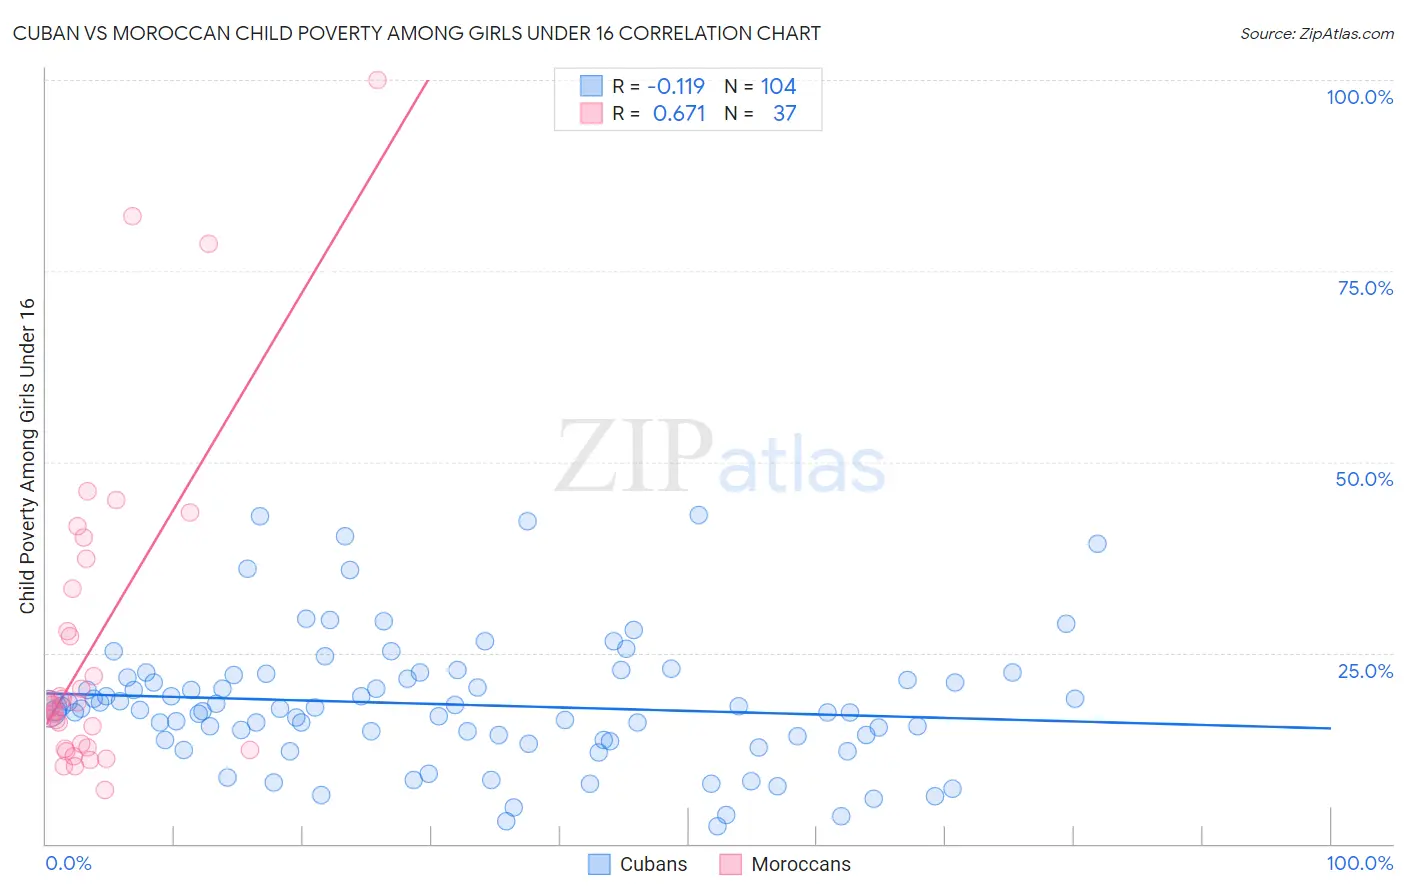 Cuban vs Moroccan Child Poverty Among Girls Under 16